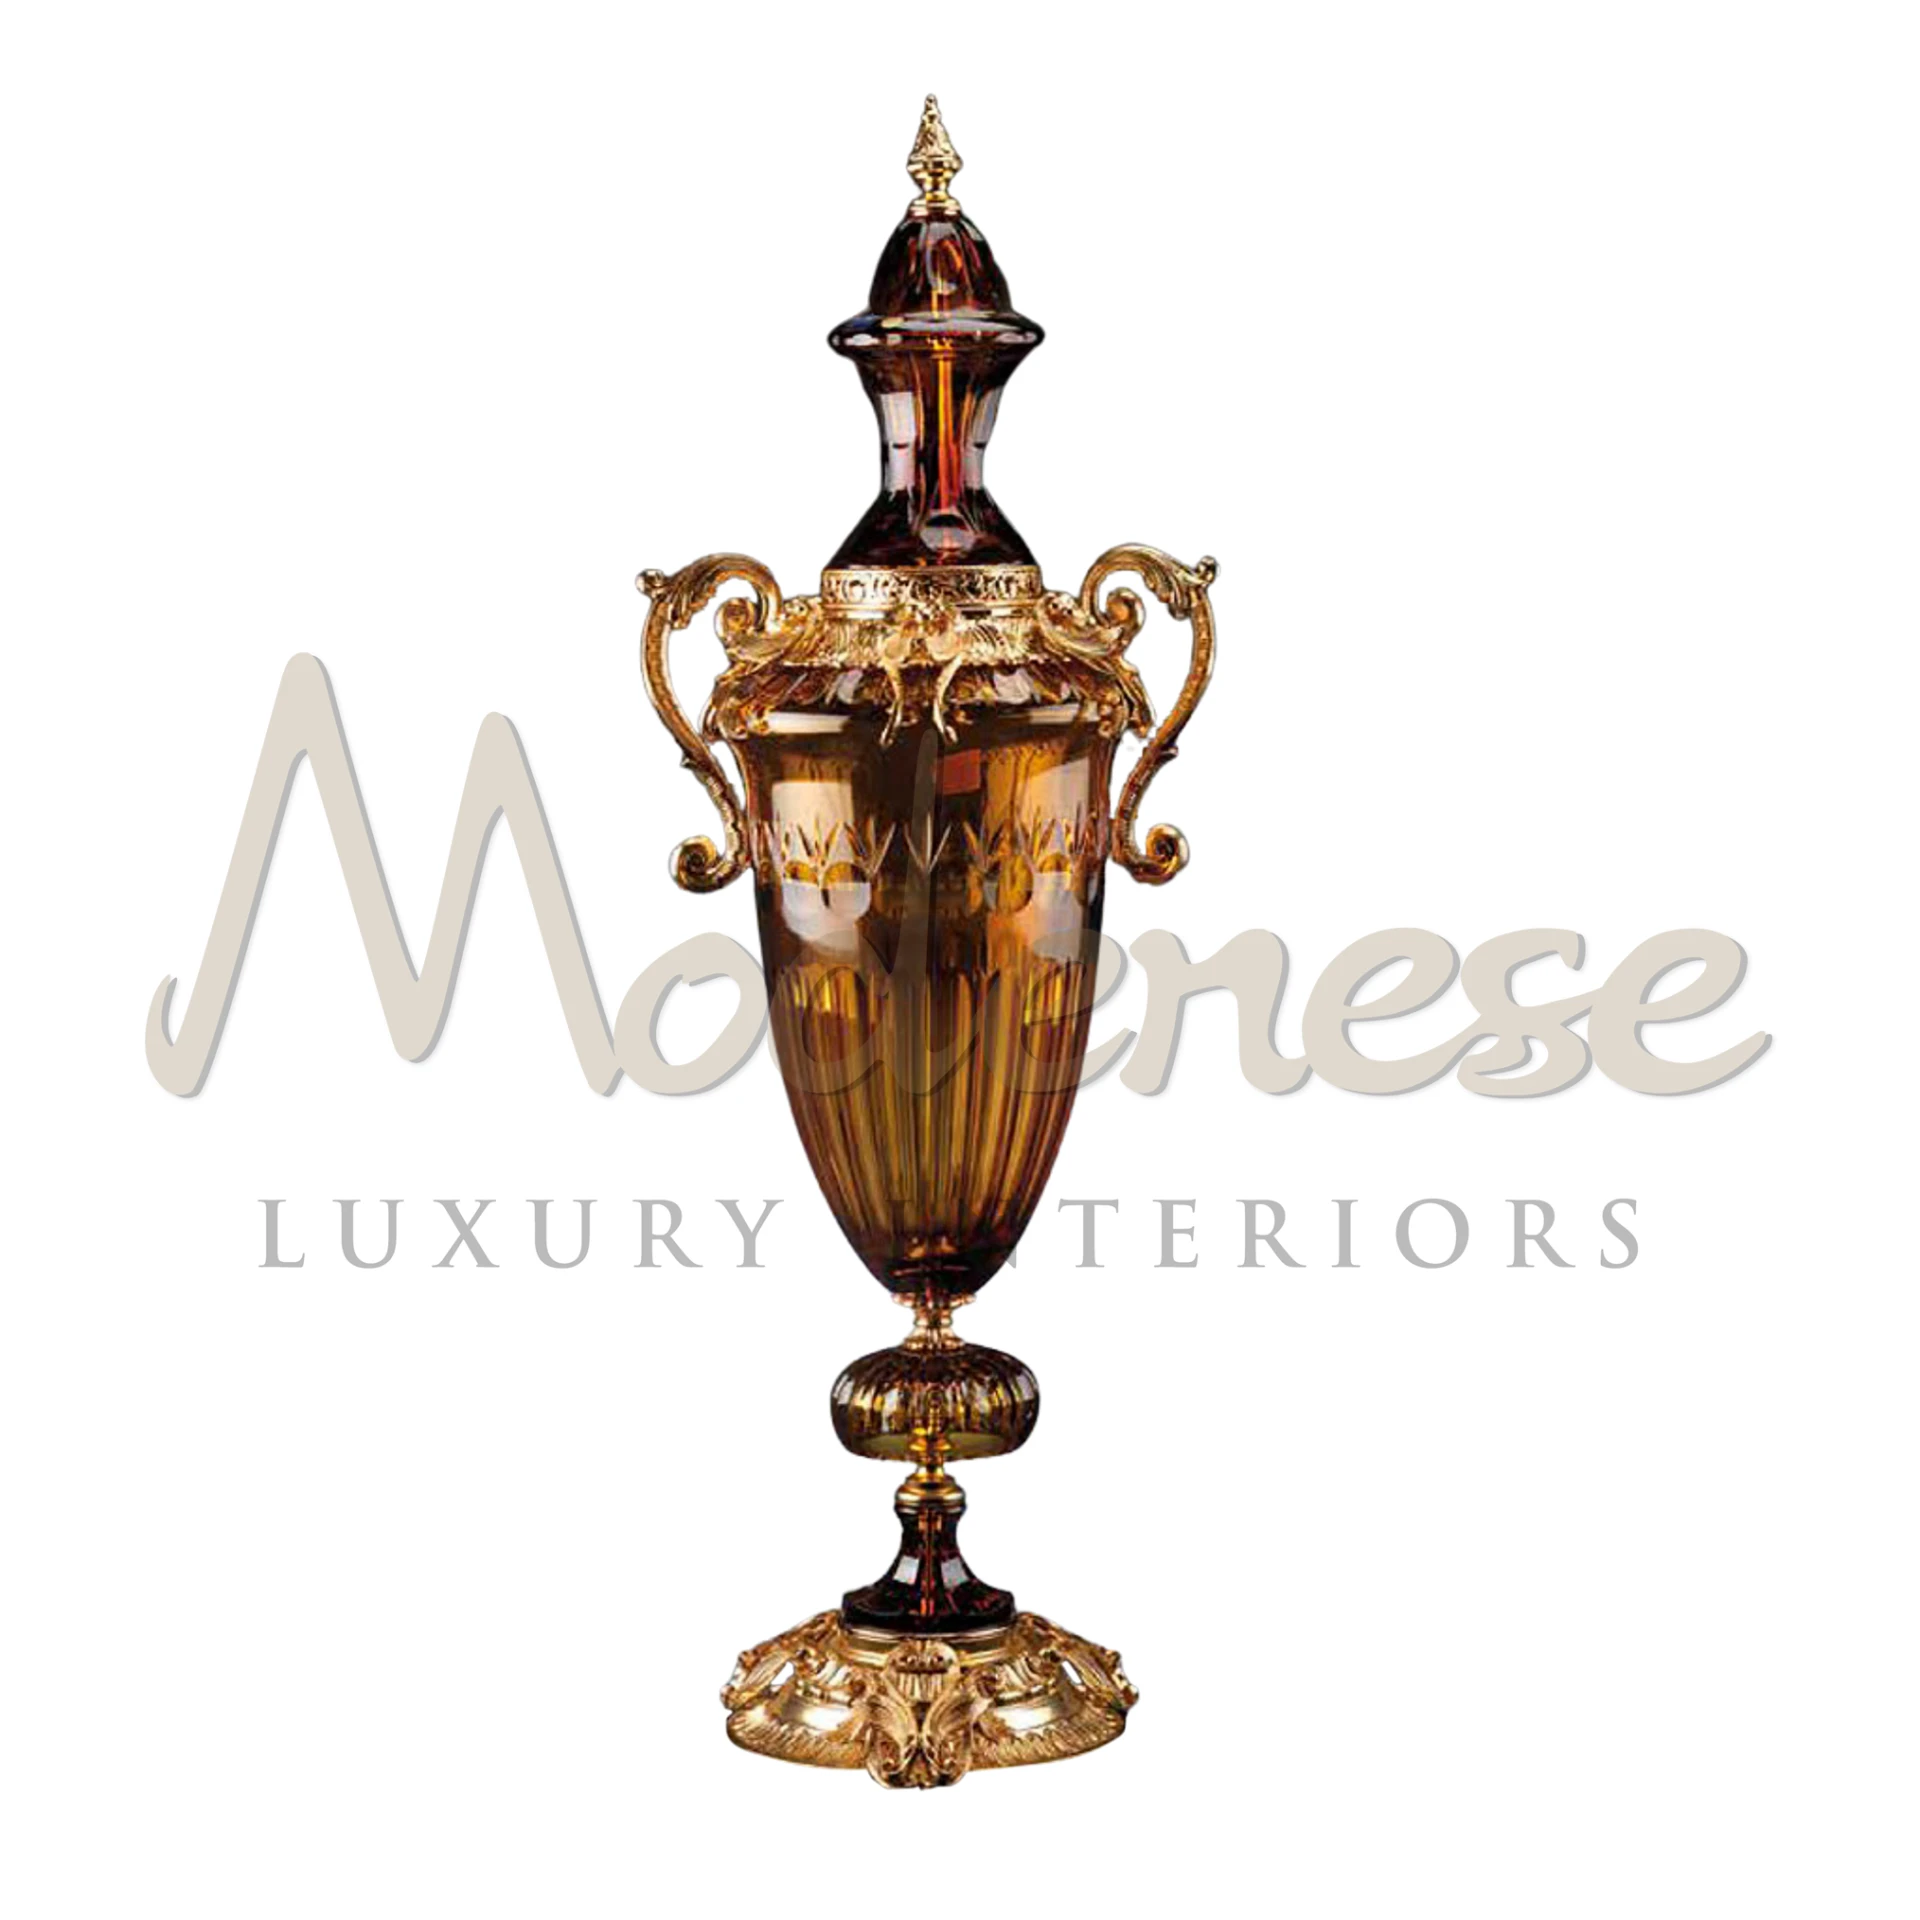 Victorian glass amphora by Modenese, an opulent piece with ancient Greek design, perfect for lavish and classic interior design themes.






